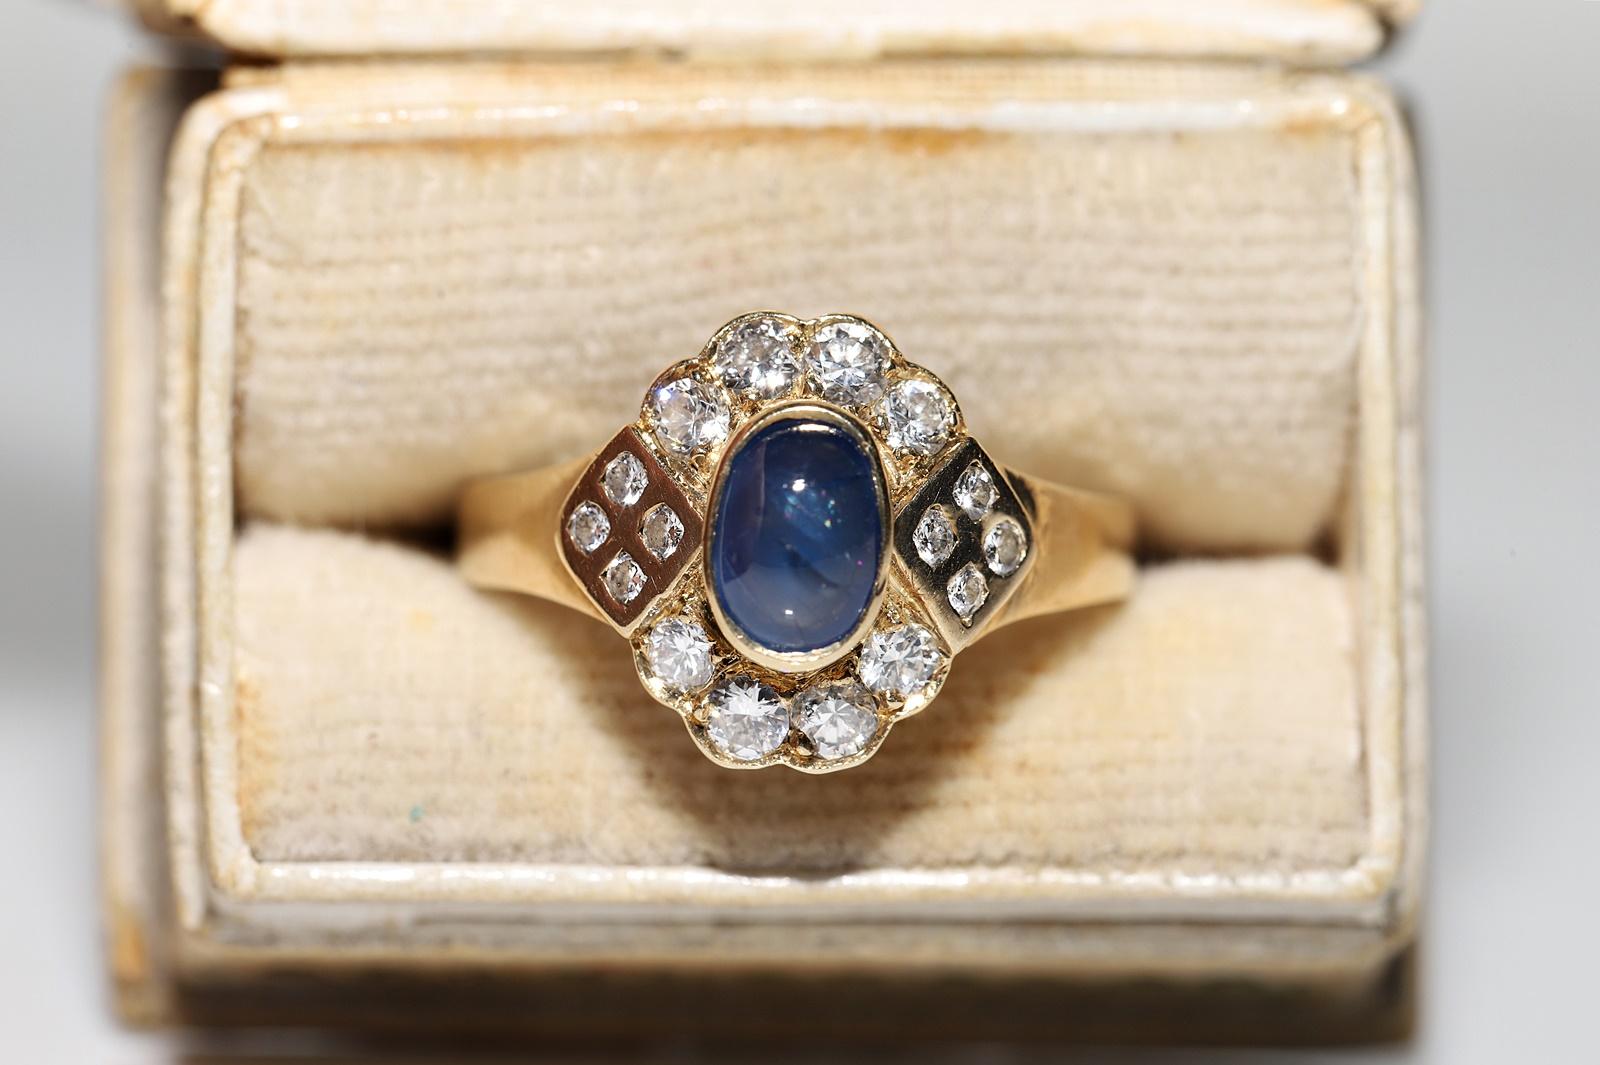 In very good condition.
Total weight is 4.3 grams.
Total weight is diamond 0.60 ct.
The diamond is has G-H color and vvs-vs-s1 clarity.
Totally is sapphire 1 ct.
Ring size is US 7 (We offer free resizing)
We can make any size.
Box is not